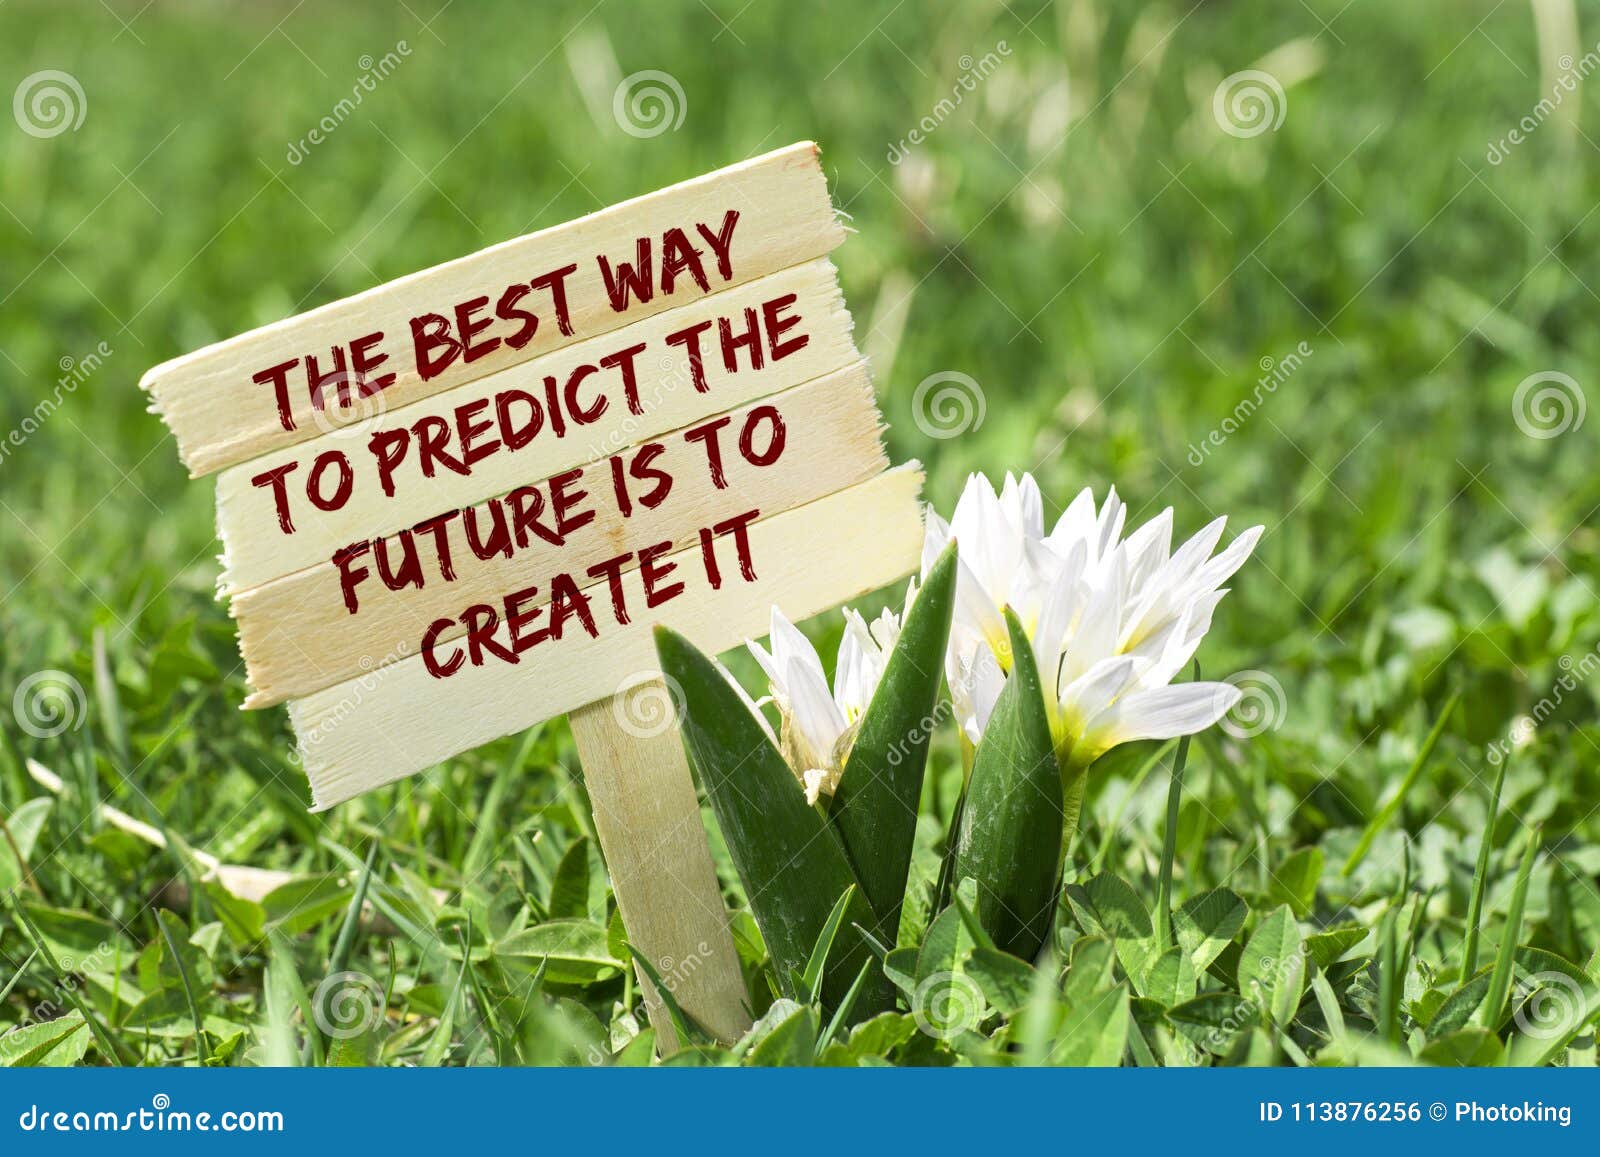 the best way to predict the future is to create it